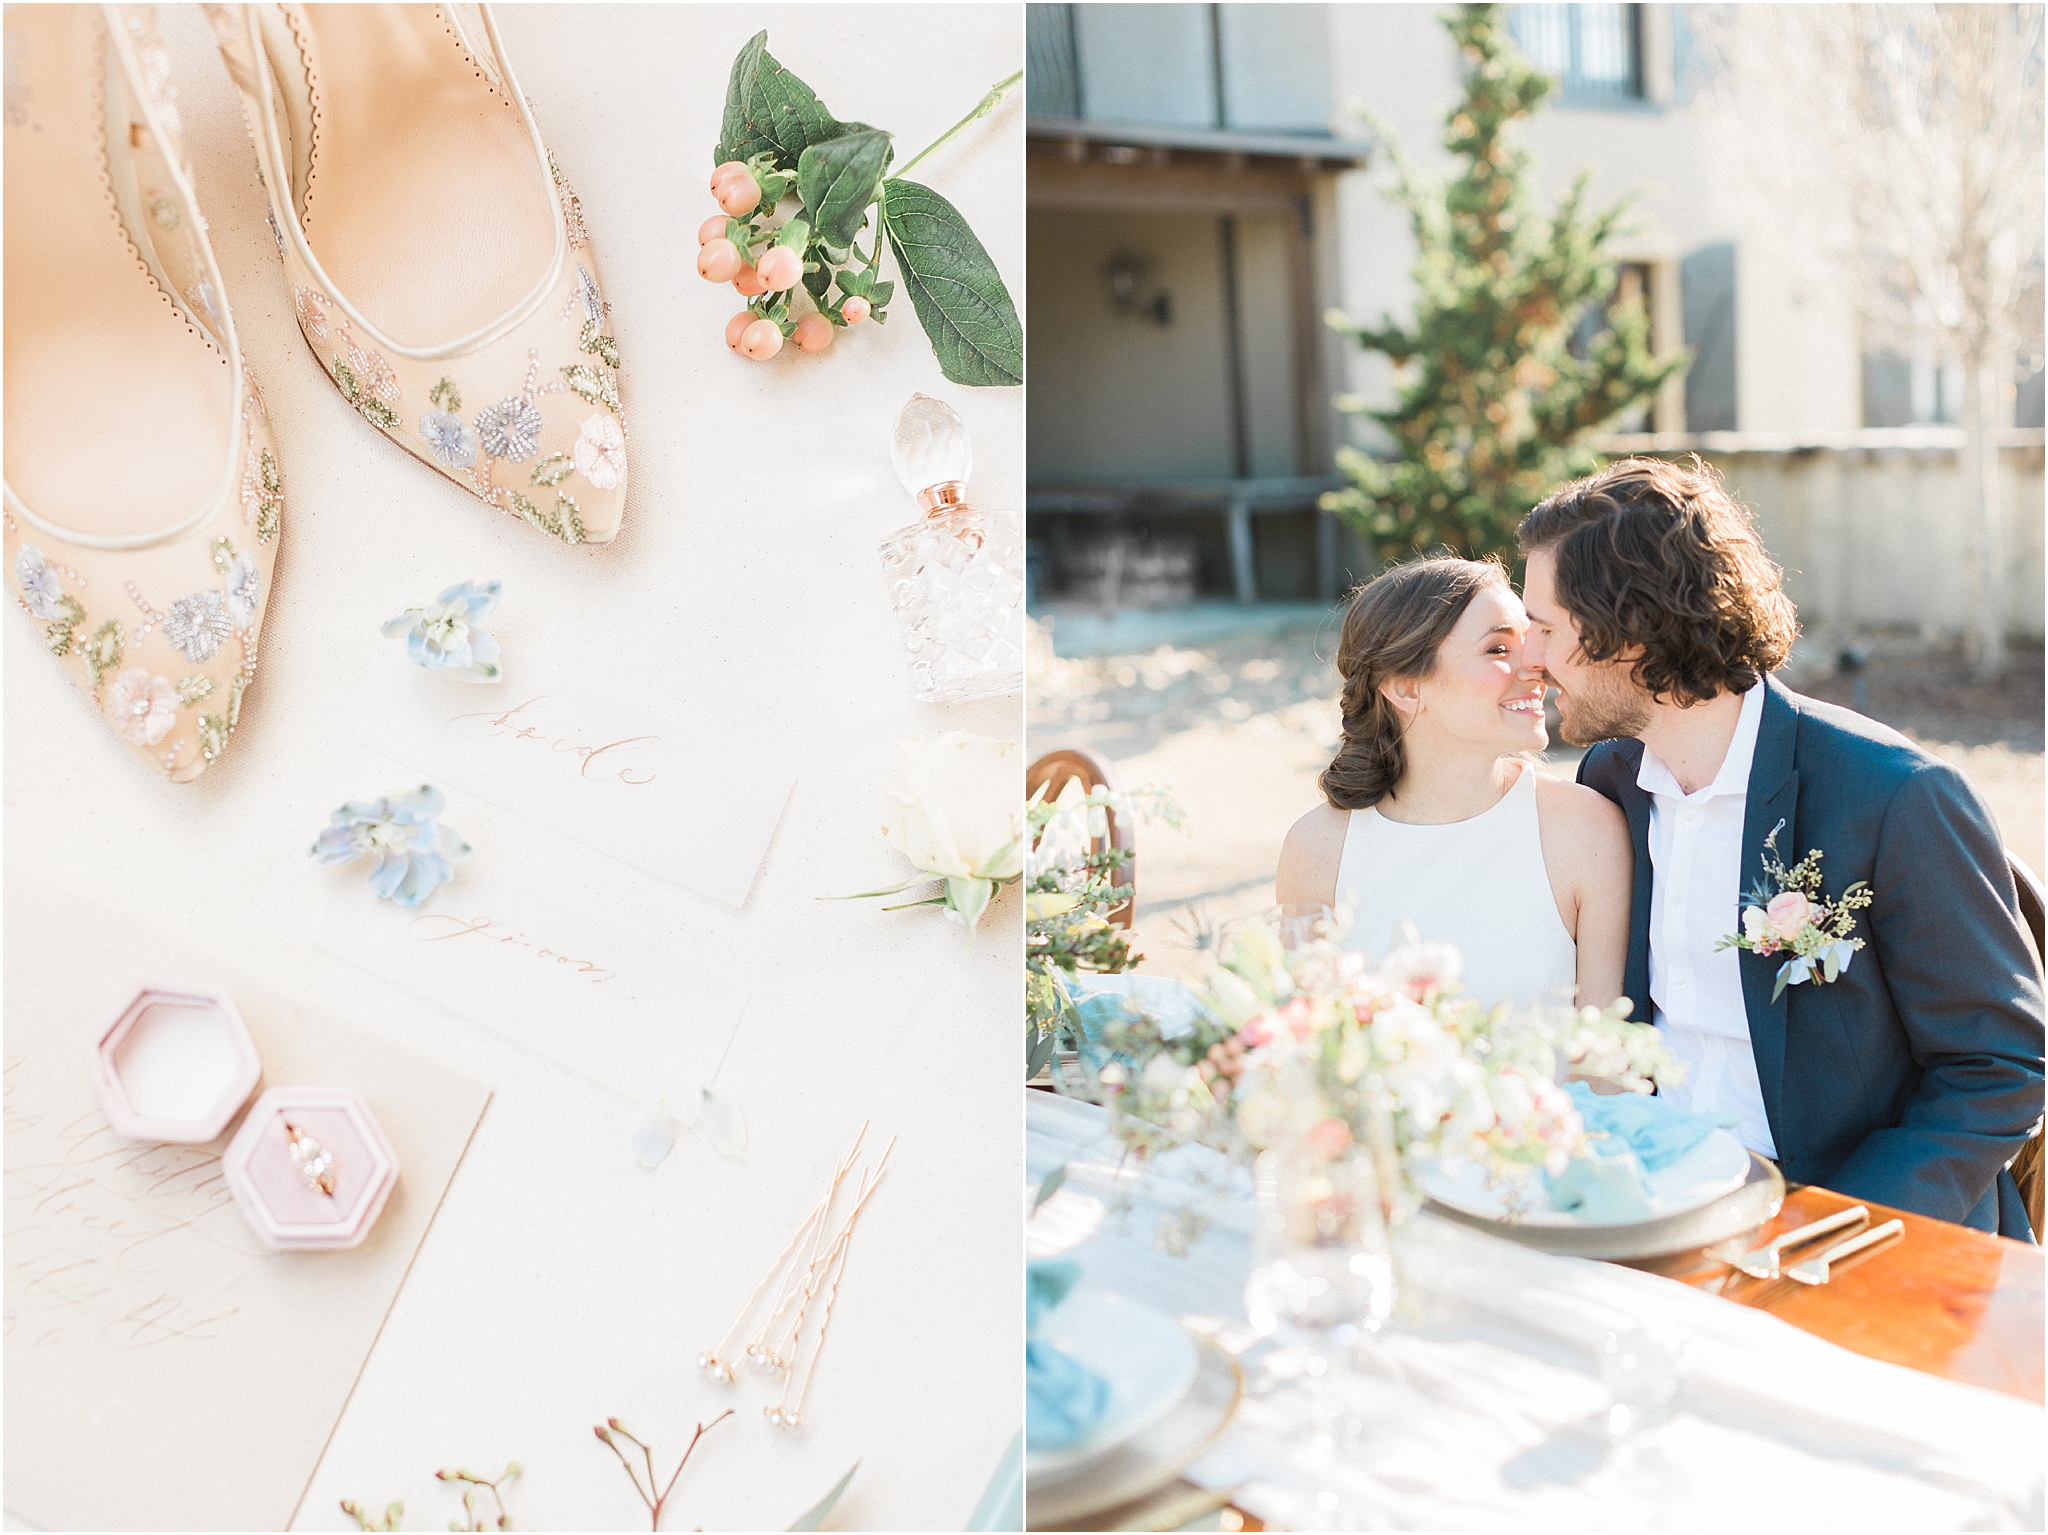 Intimate wedding at Hotel Domestique in Greenville, South Carolina